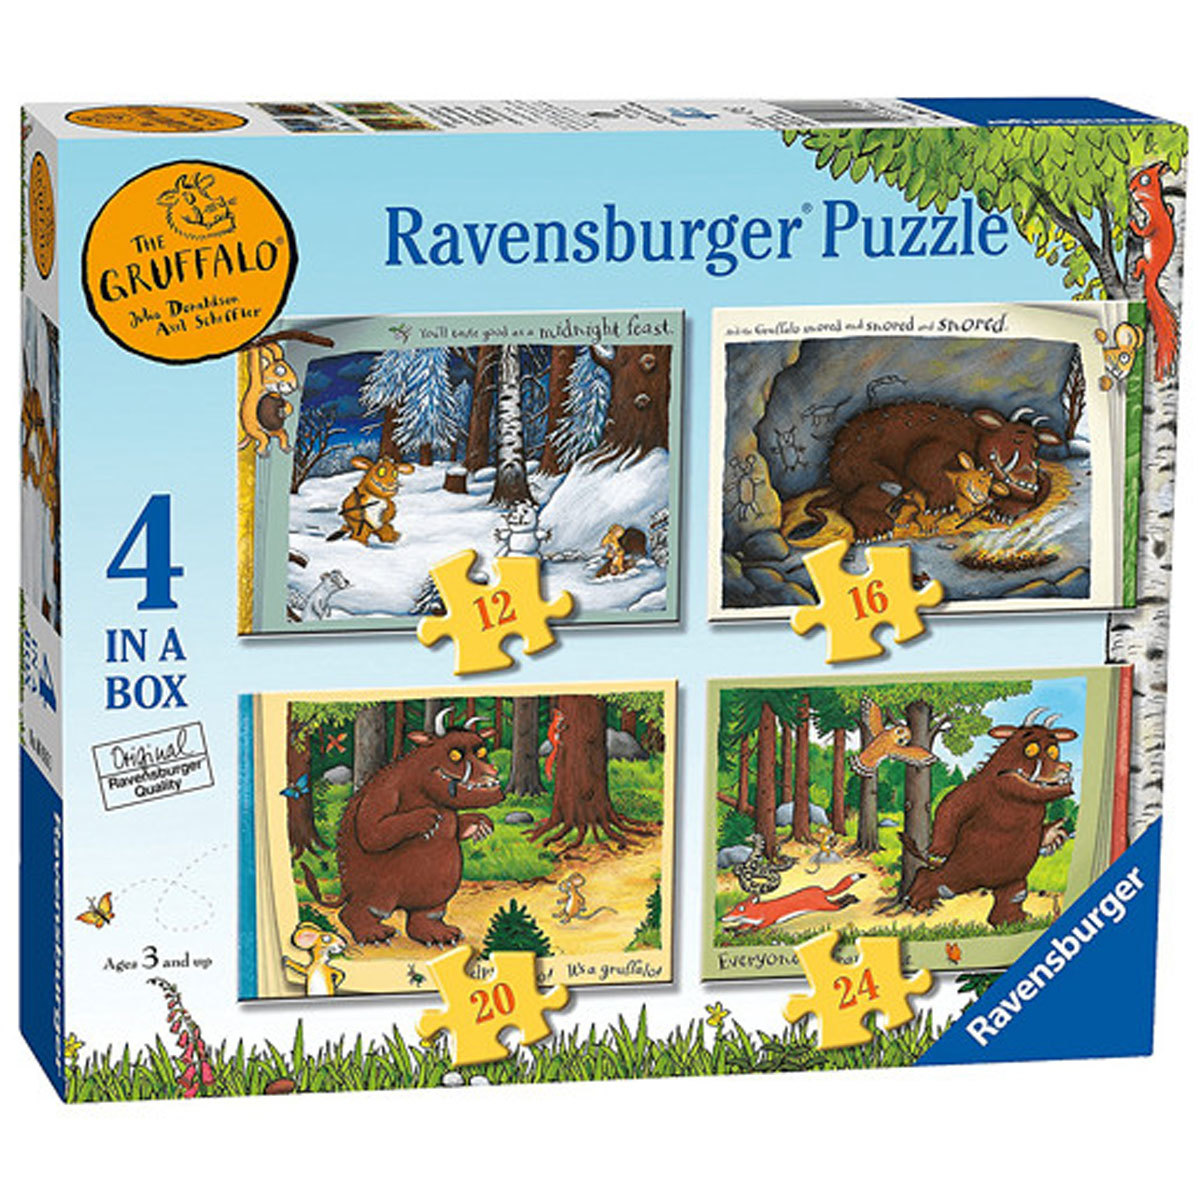 Ravensburger 4 in a Box Jigsaw Puzzle - The Gruffalo | Early Learning Centre